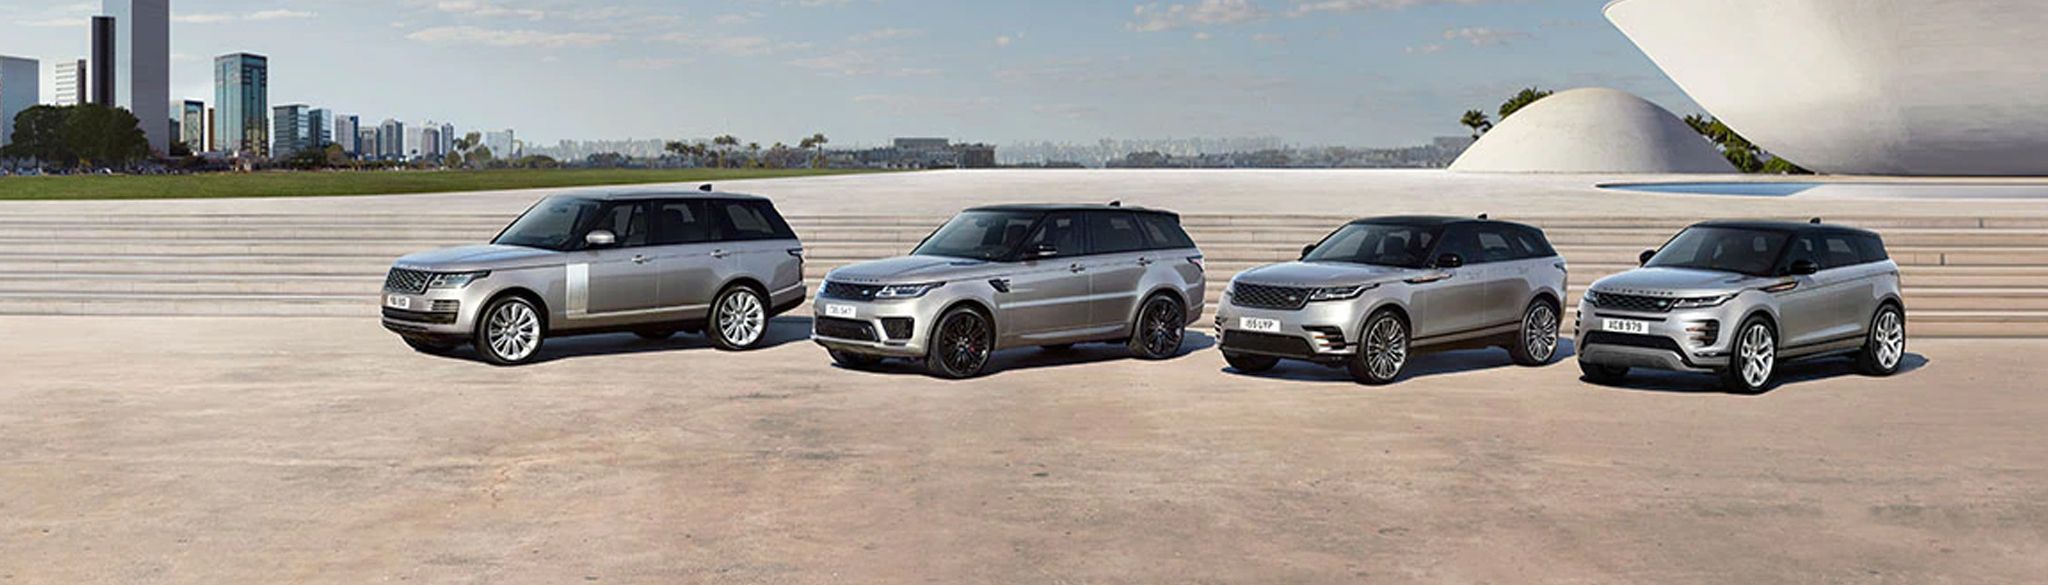 Range Rovers lined up